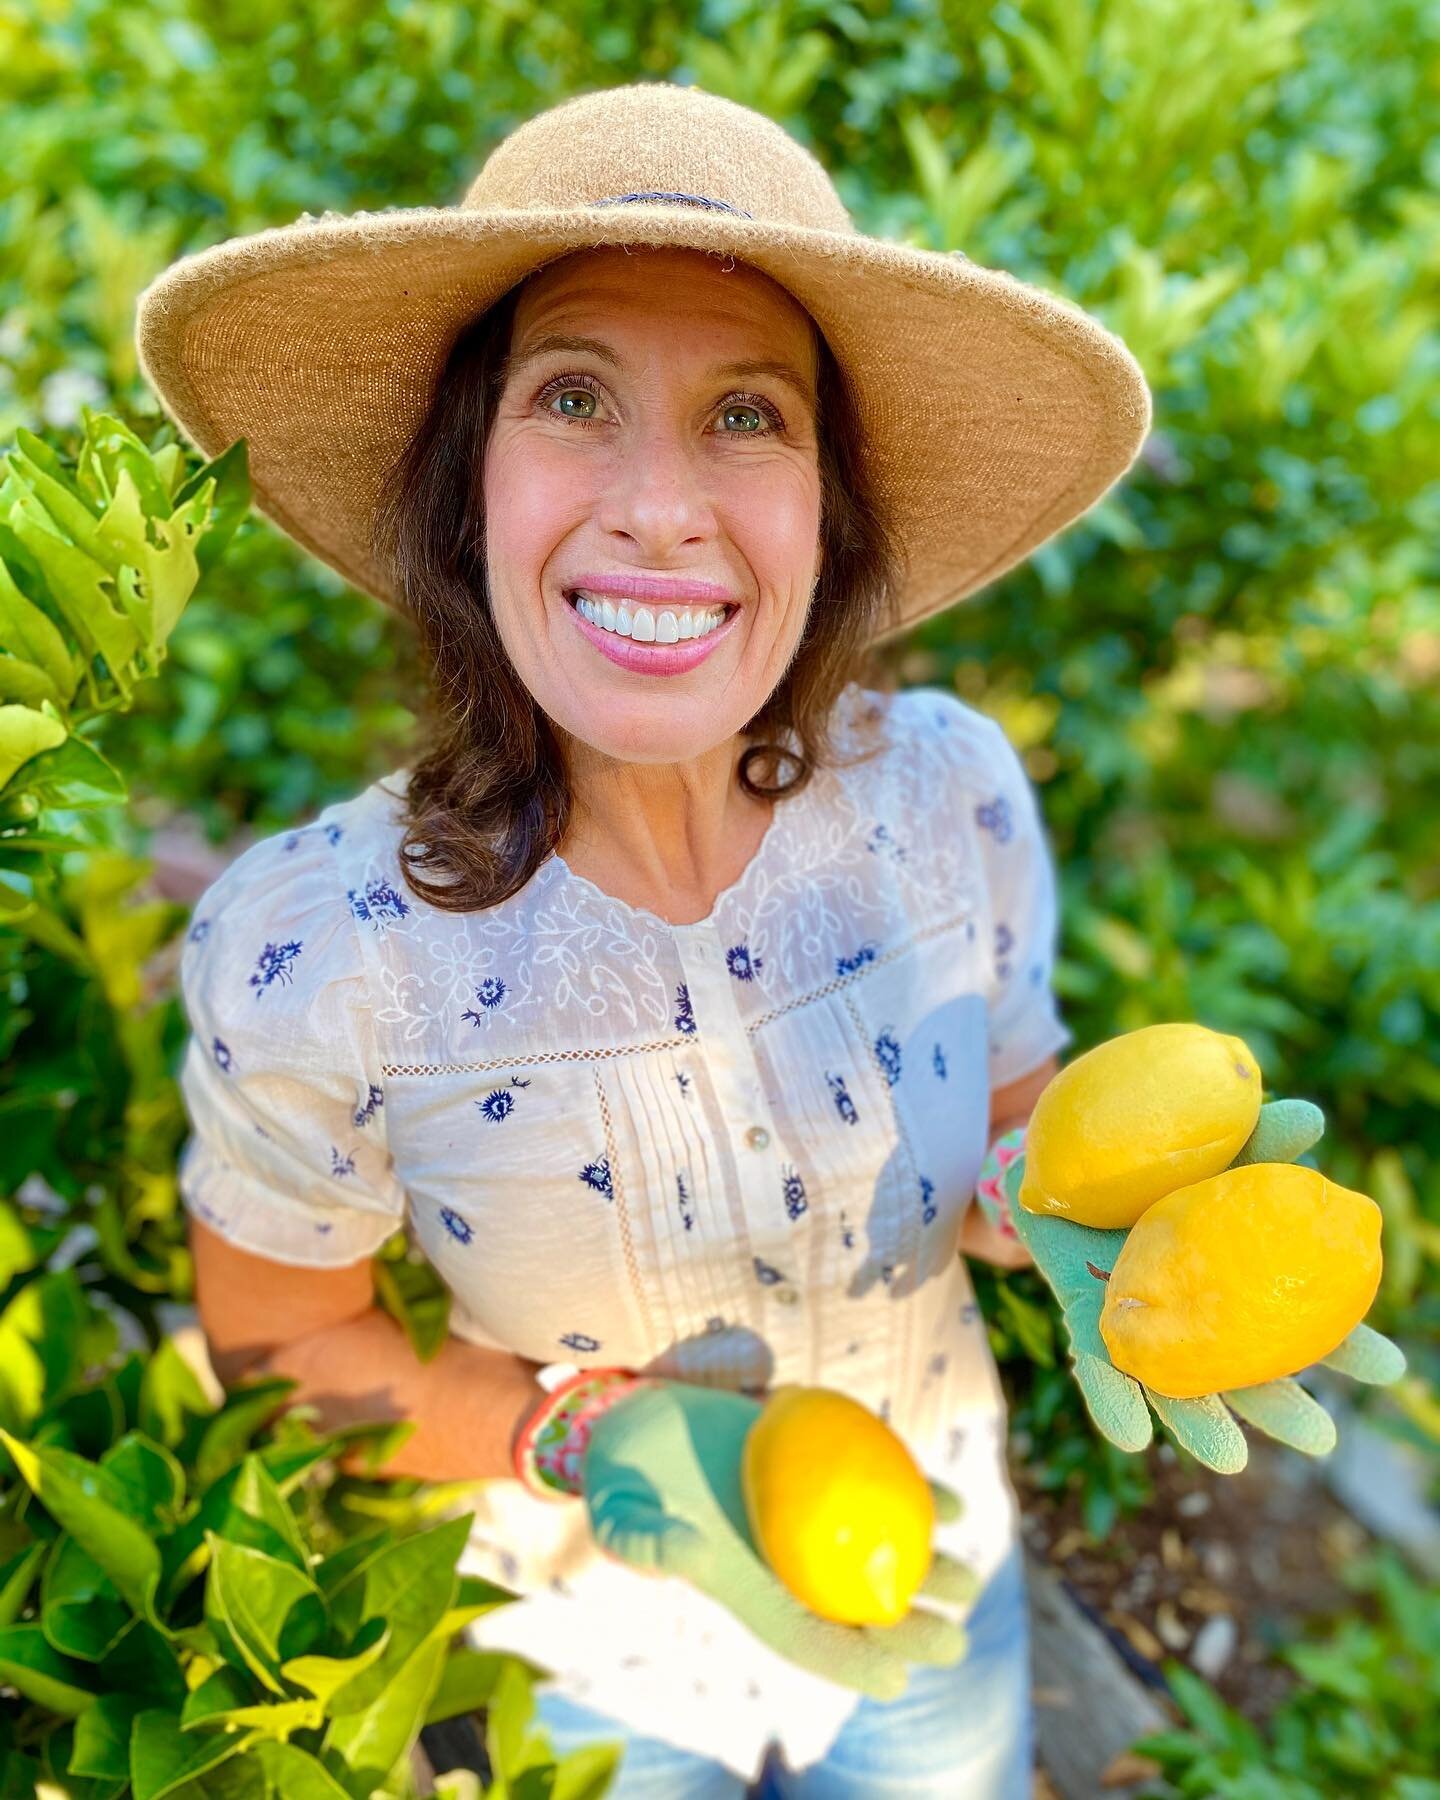 Let&rsquo;s bake something healthy using lemons 🍋! I love using seasonal ingredients to inspire my baking. Lemons are in season now in my garden so I&rsquo;m using them in lots of recipes. 🙋🏻&zwj;♀️What is growing in your garden? Do you have a fav